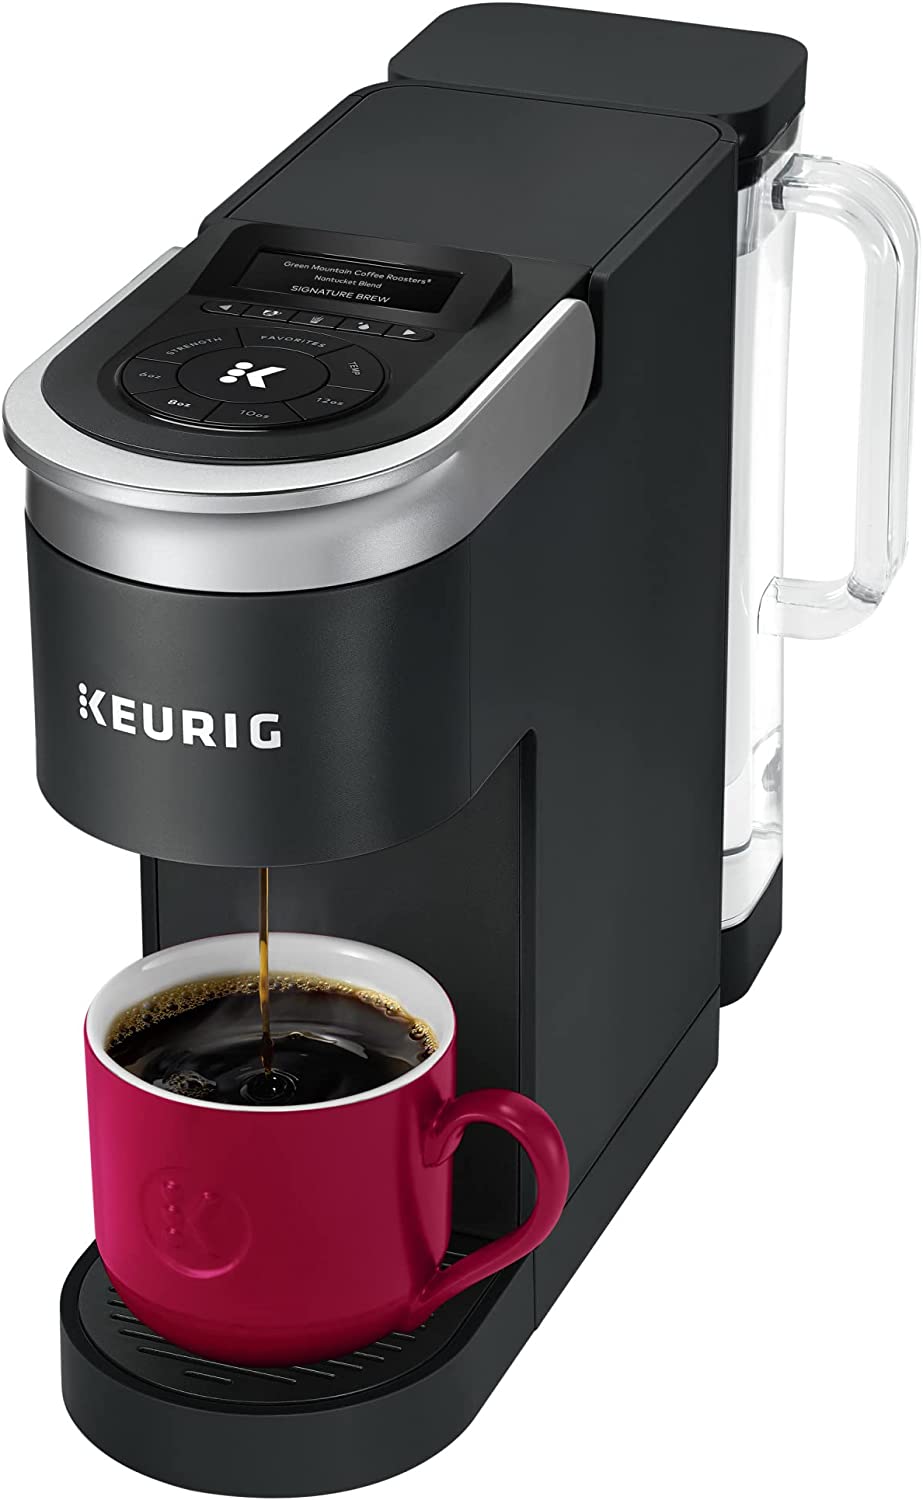 Keurig K-Supreme SMART Single Serve Coffee Maker With Wifi Compatibility, 4 Brew Sizes, And 66oz Removable Reservoir, Compatible with Alexa, Black